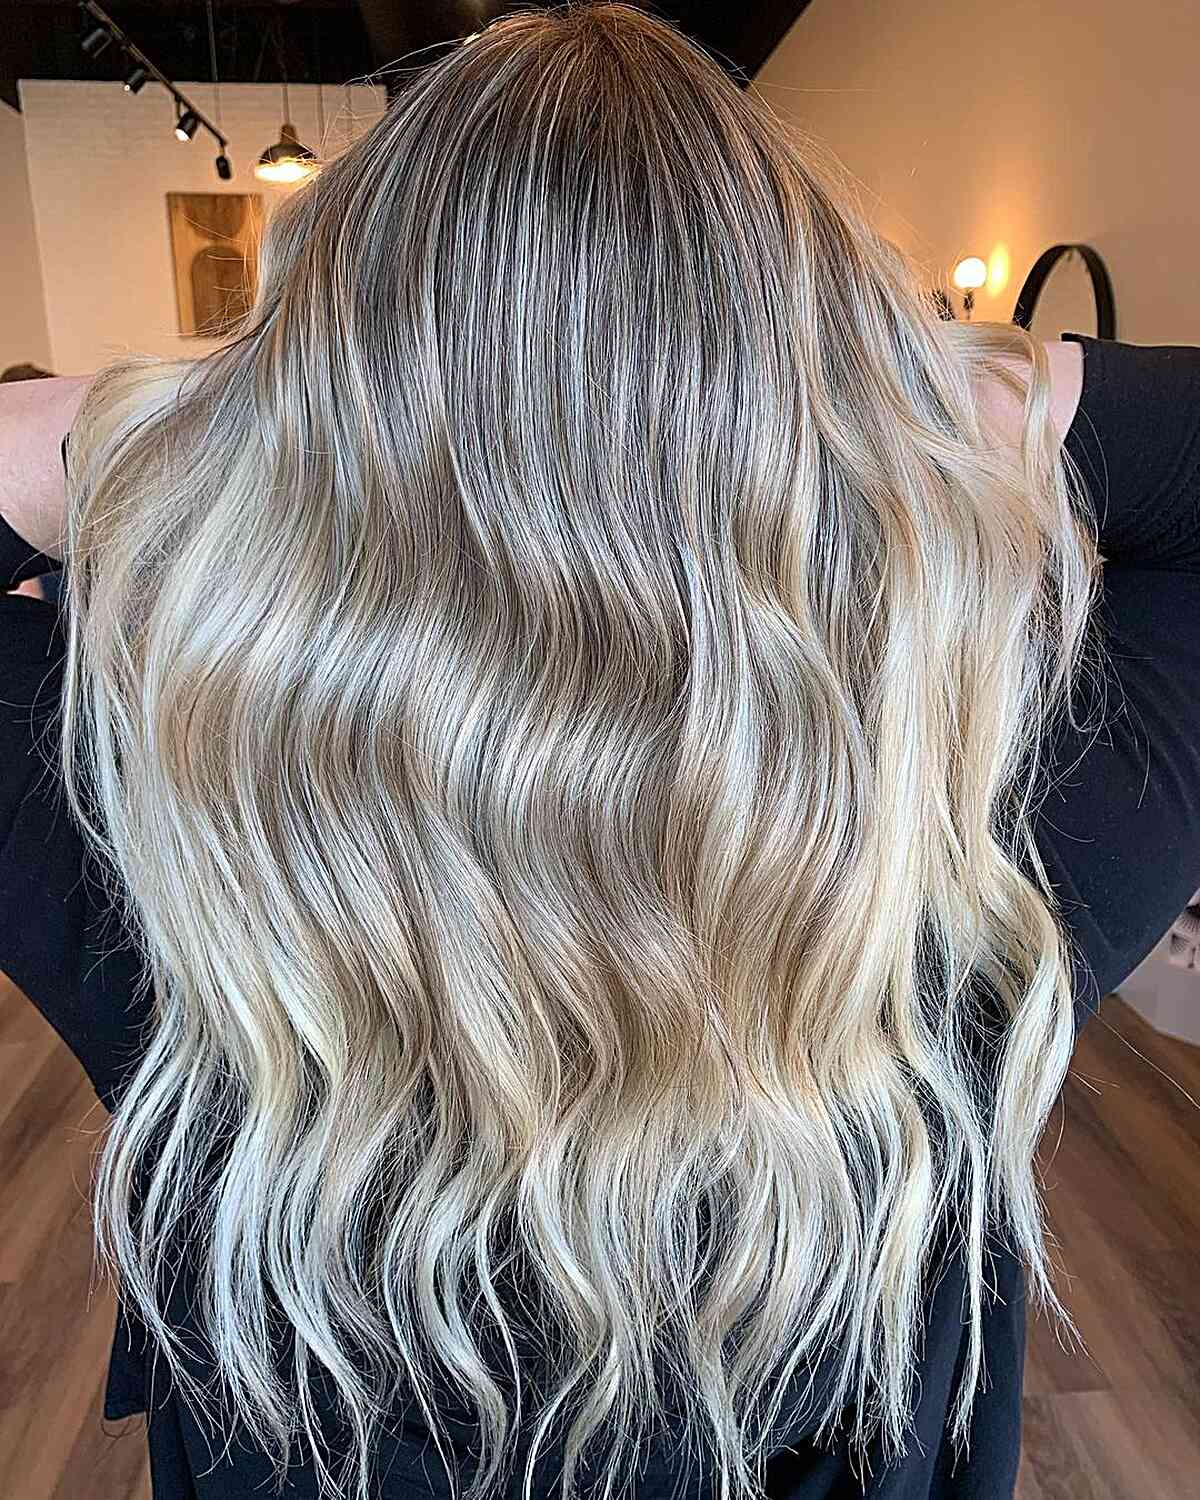 Rooted Platinum Dirty Blonde Balayage on Long Hair with Choppy Ends